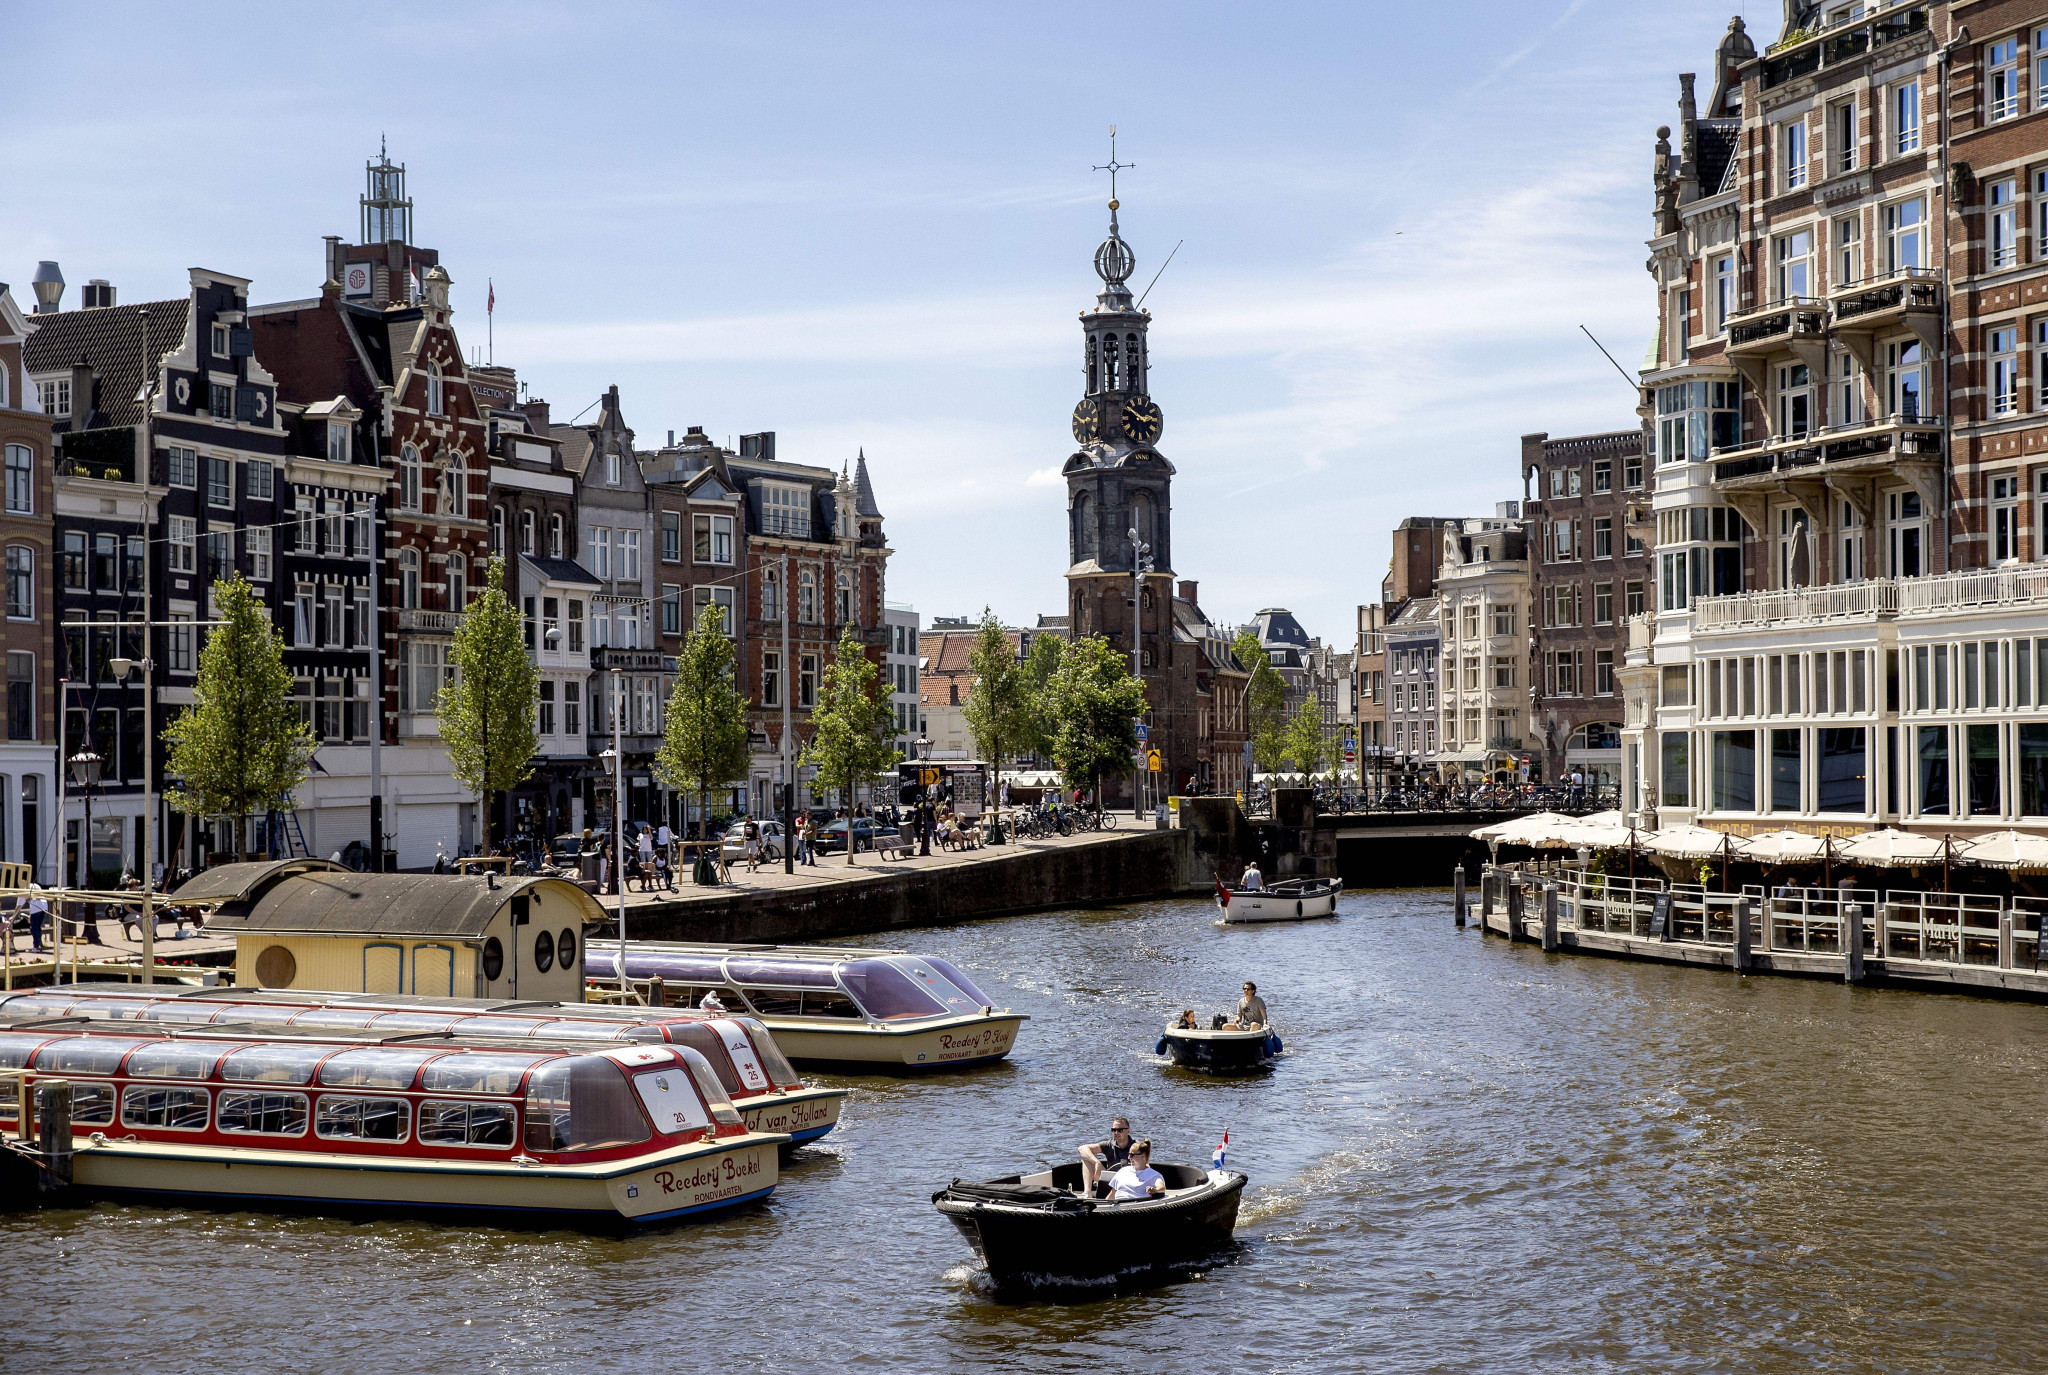 The GAMMA World Congress and World Championships are now due to take place in Amsterdam in March ©GAMMA